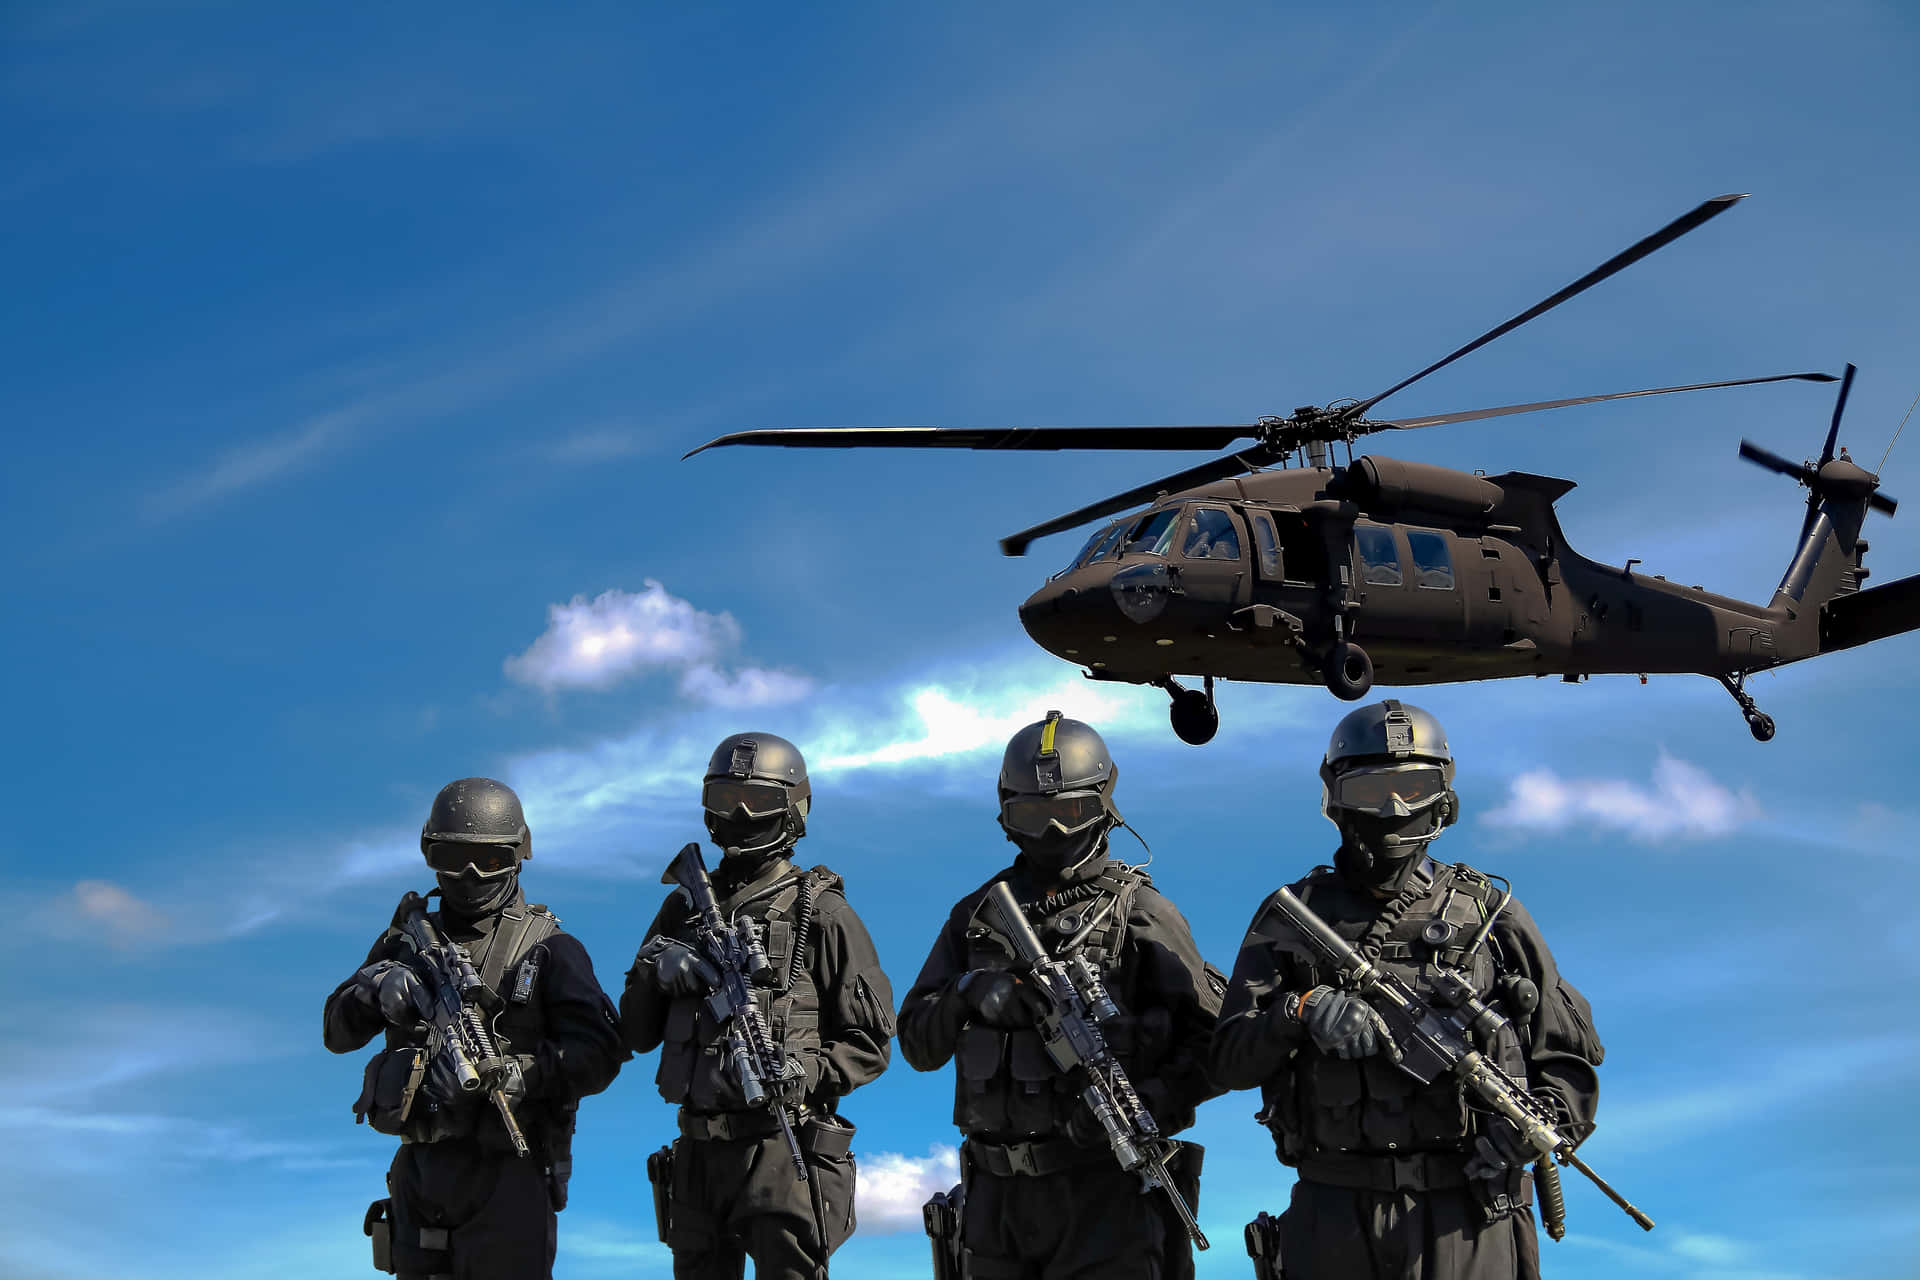 A Group Of Soldiers Standing In Front Of A Helicopter